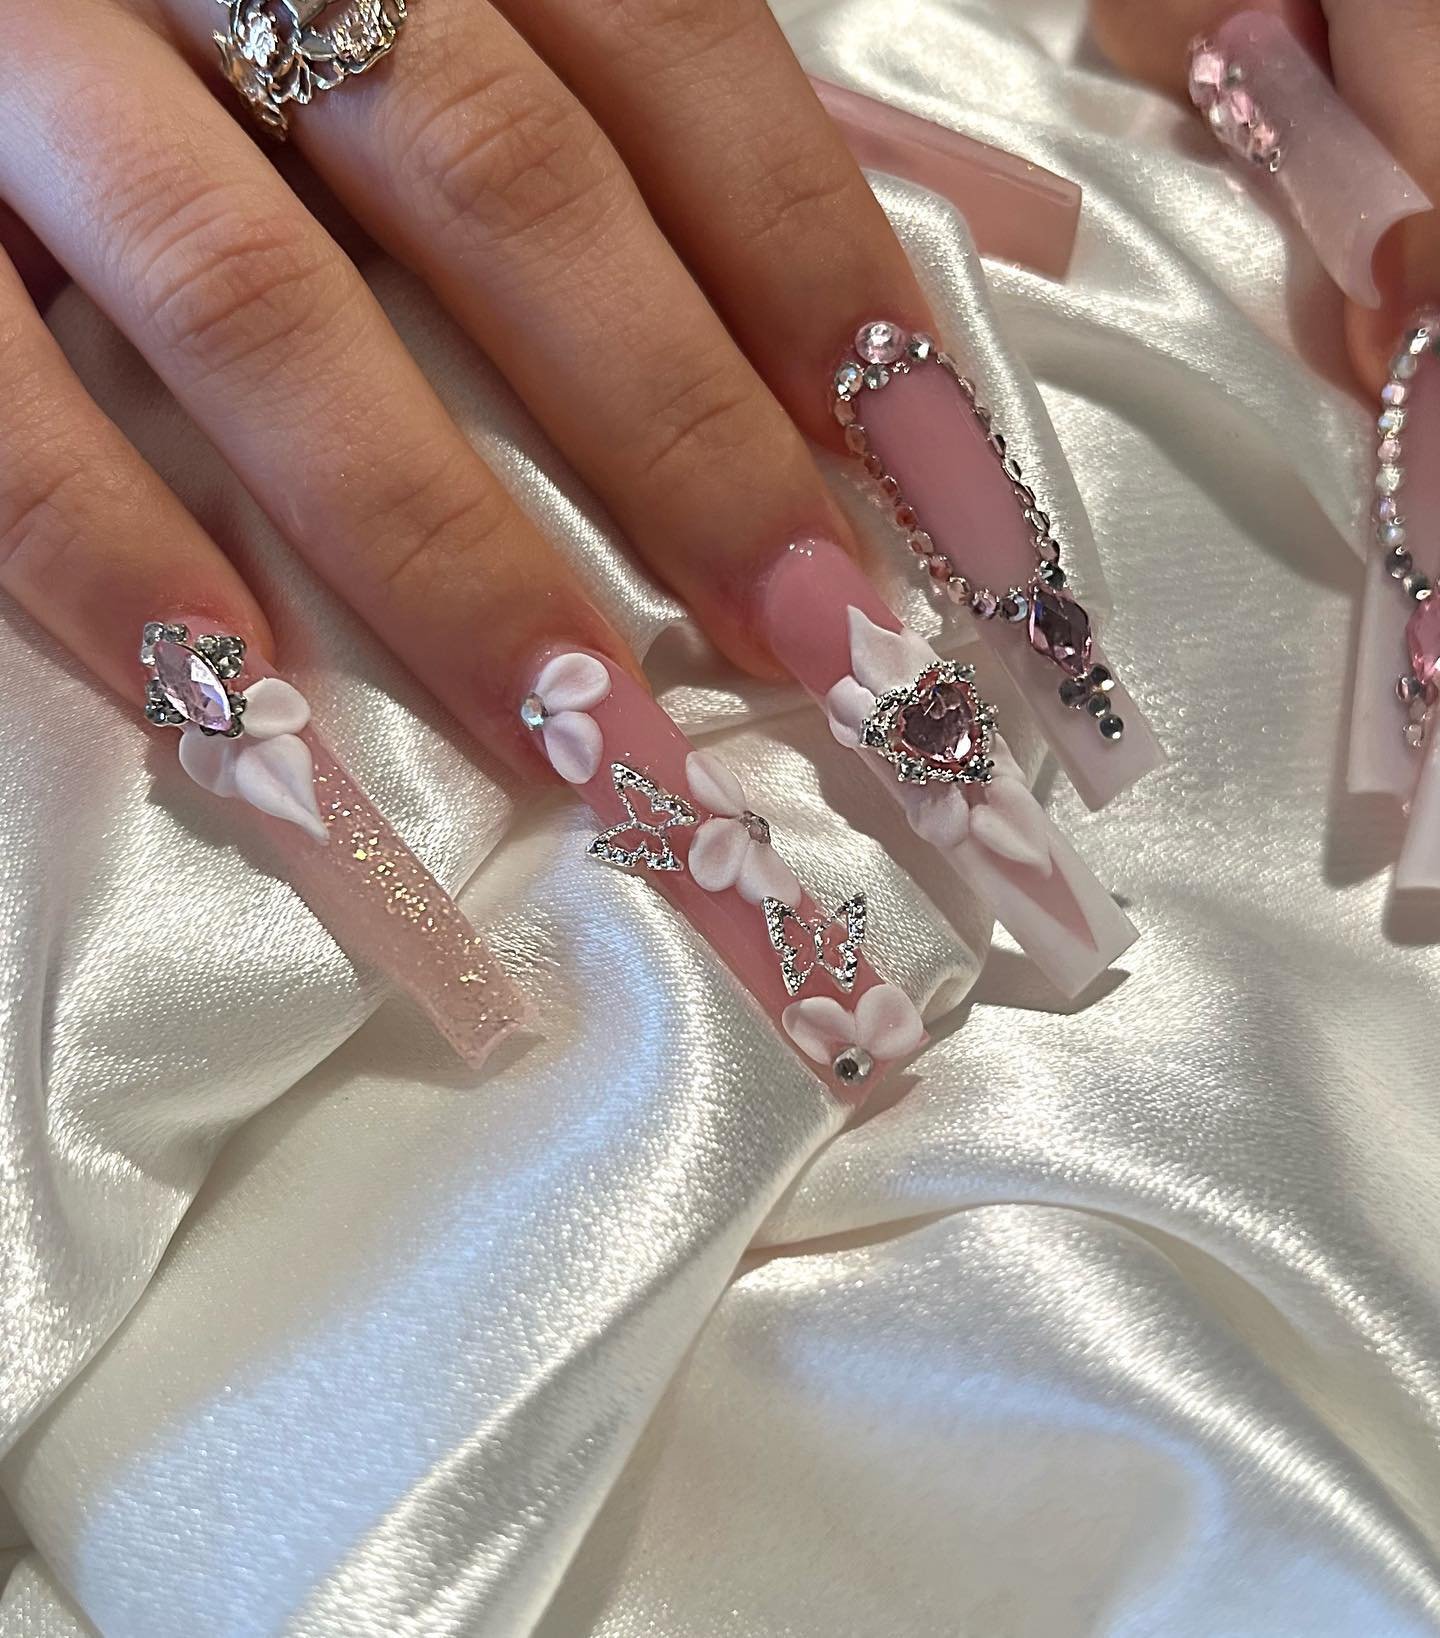 37 - Picture of Acrylic Nails